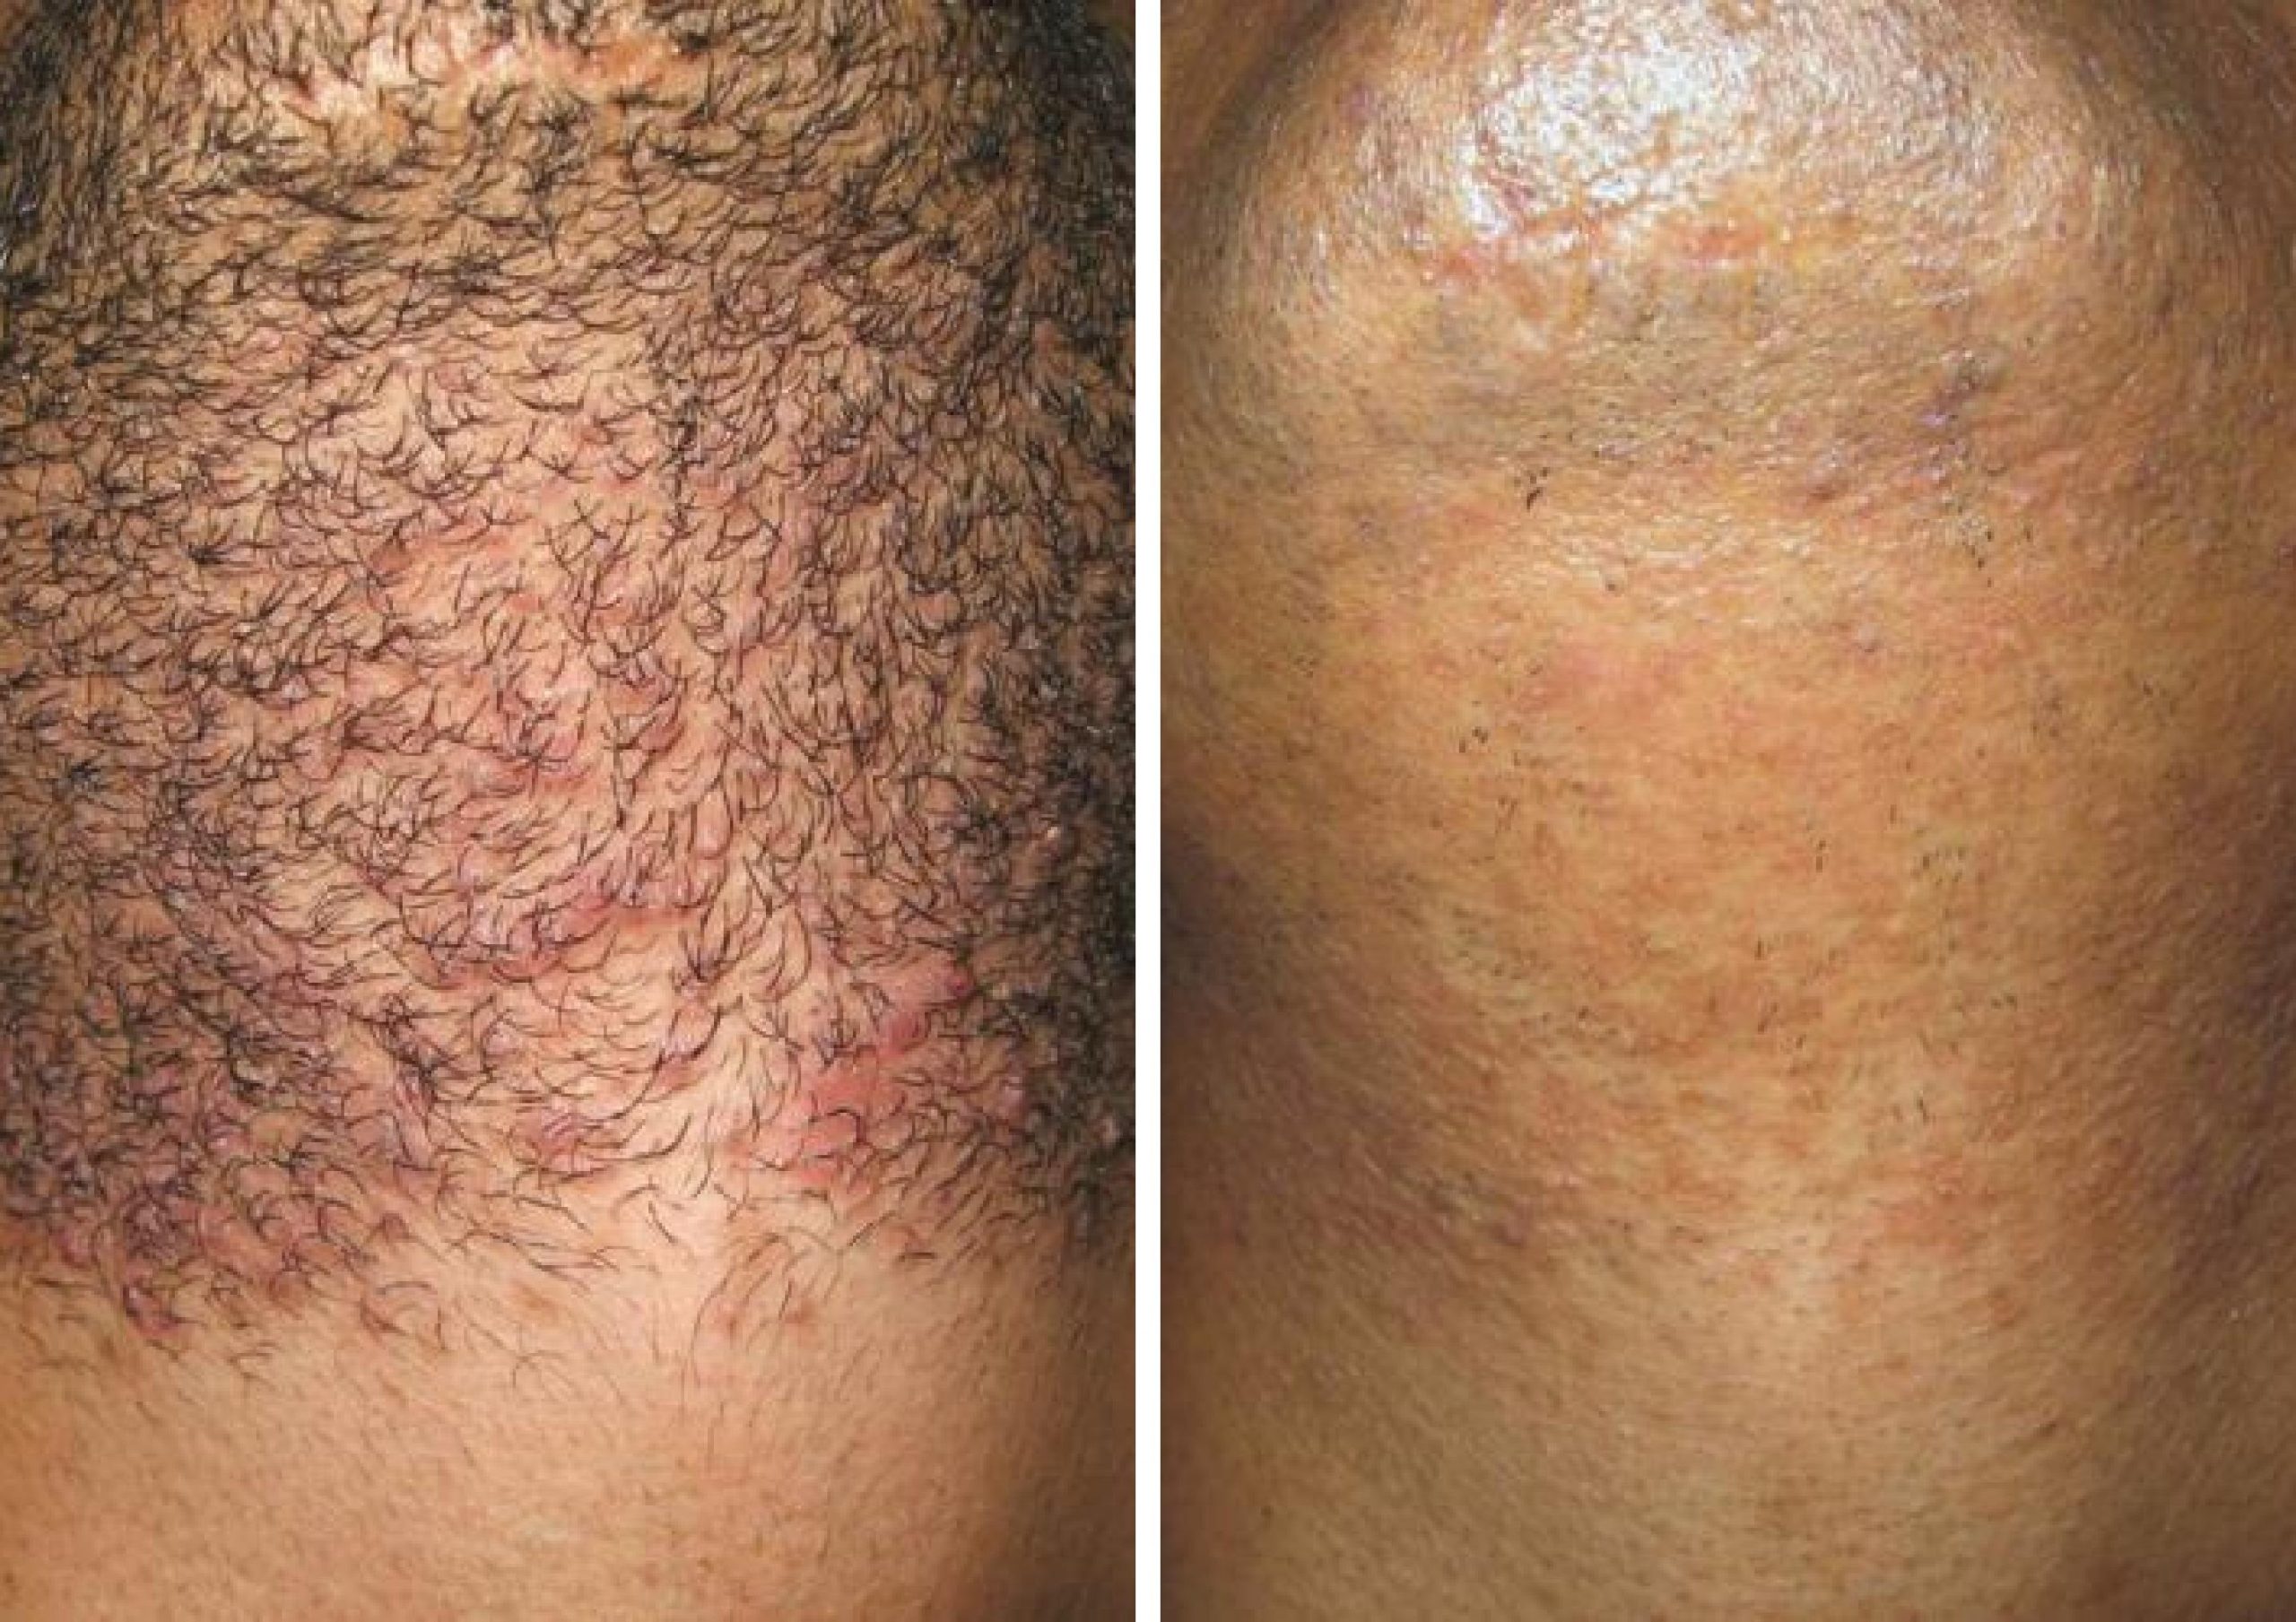 Light Blue Heat Hair Removal: Before and After Results - wide 4